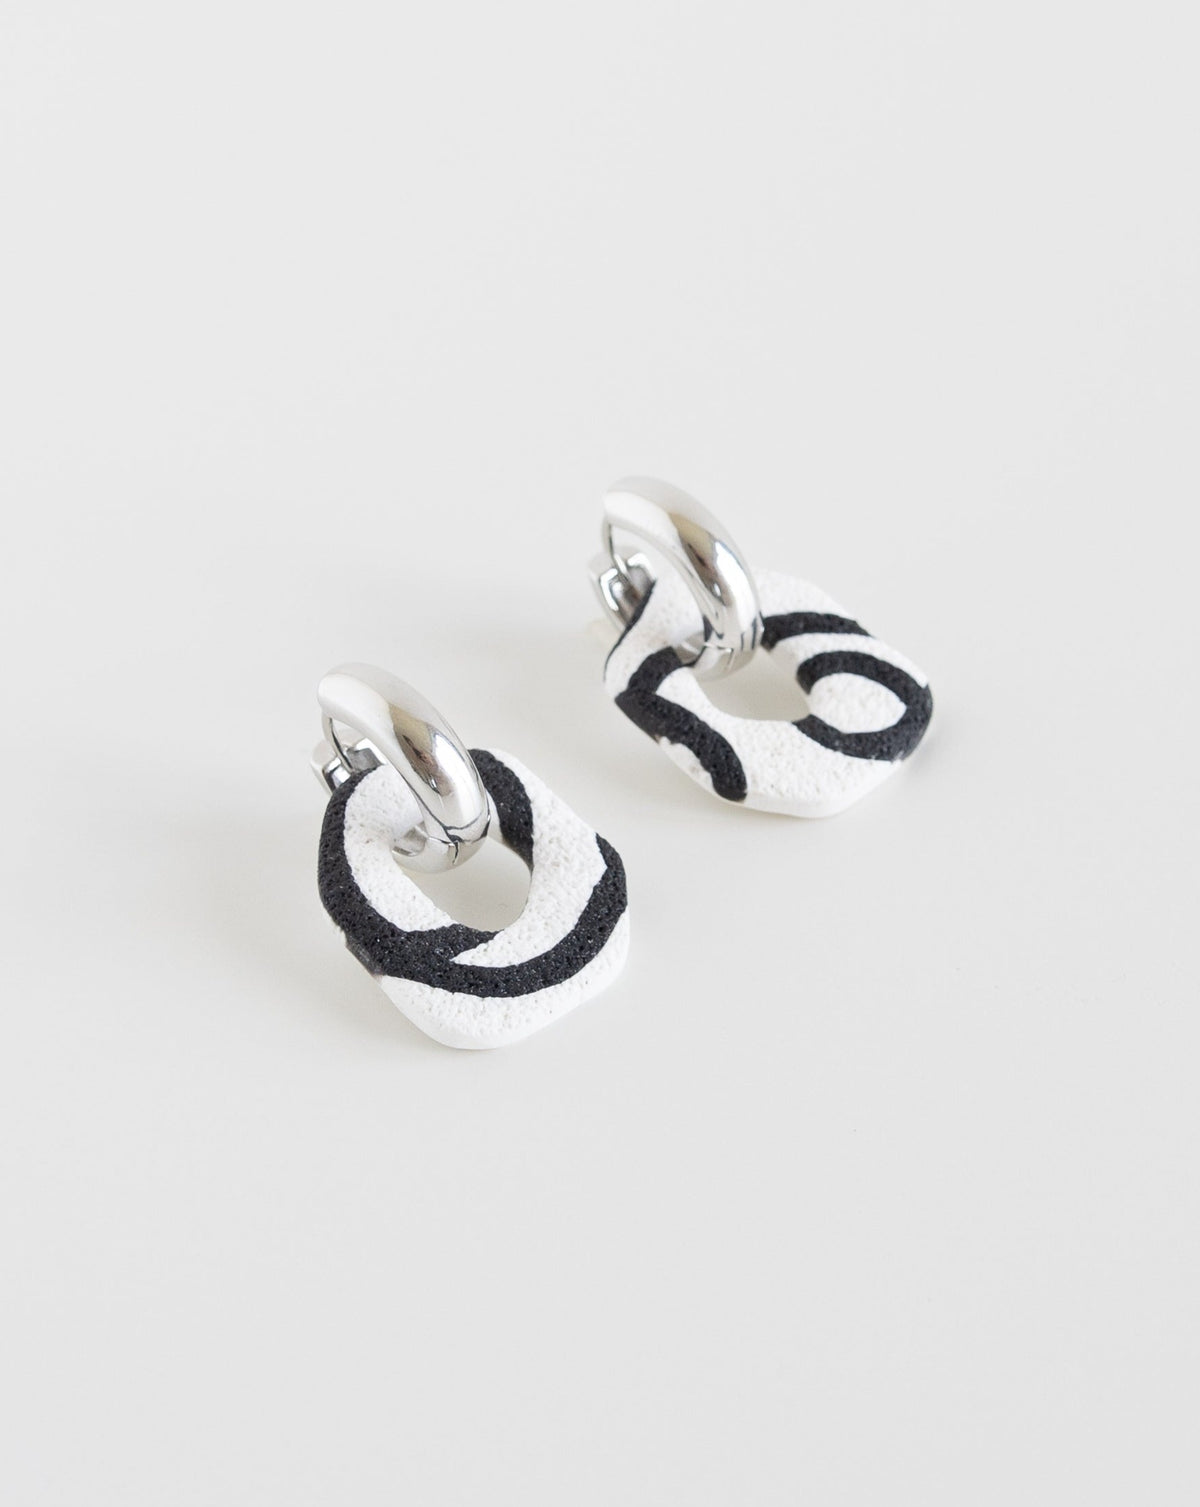 Darien earrings in Abstract White color with silver hoops, side view